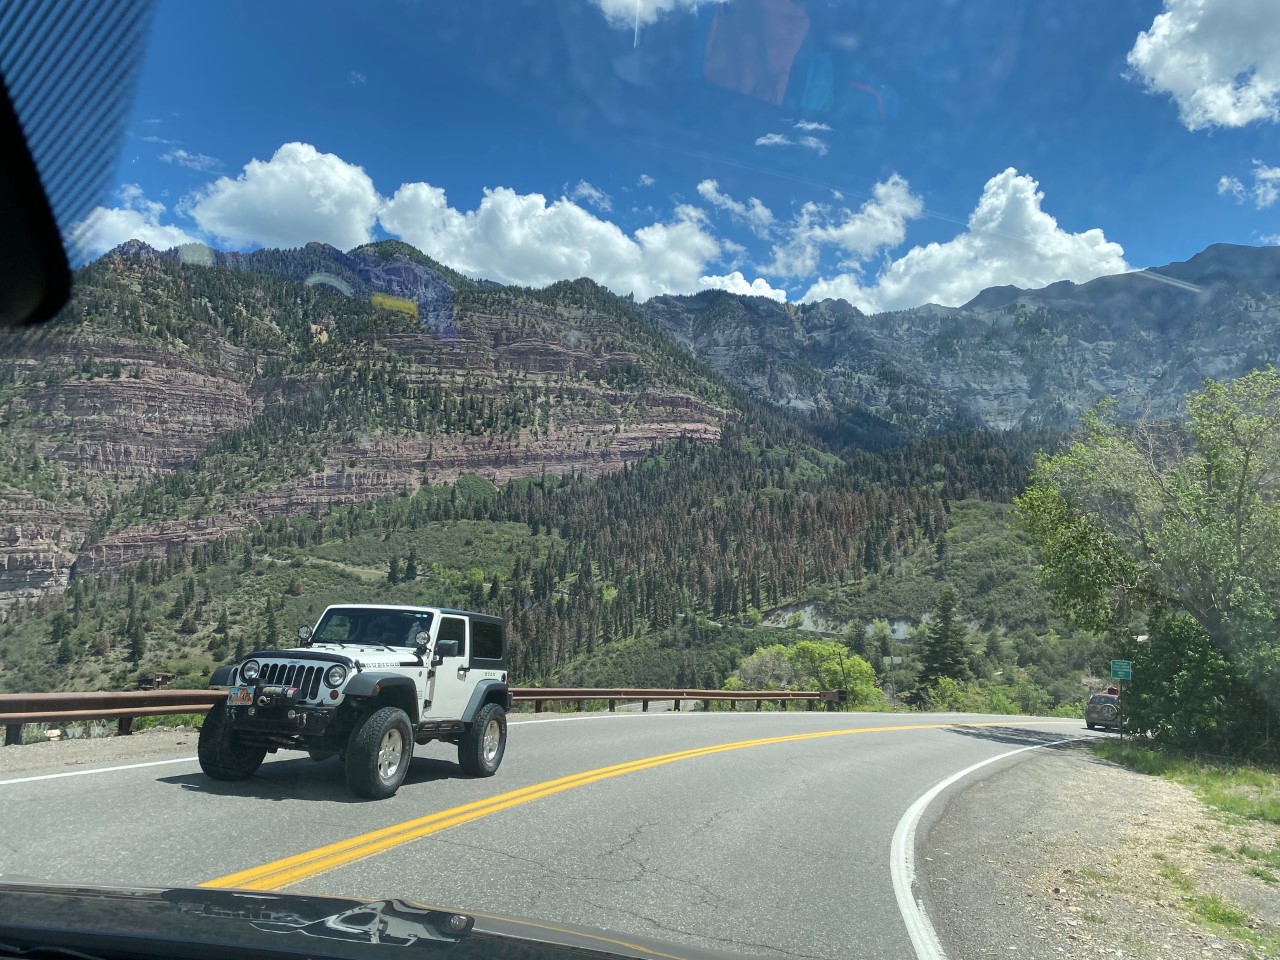 Views of the mountains approaching Ouray.